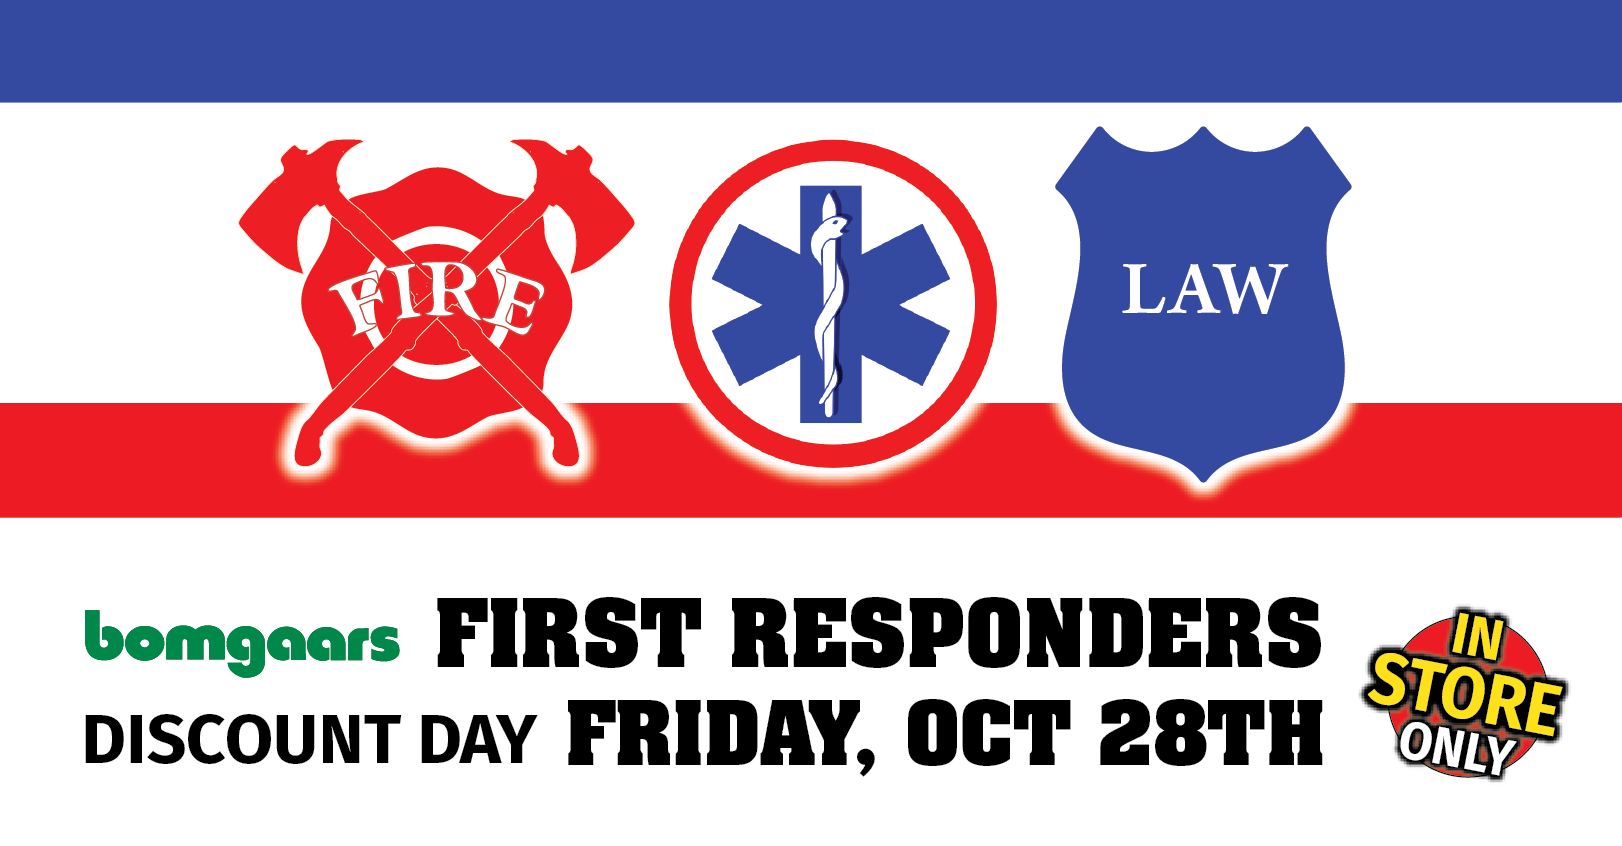 Calling All First Responders